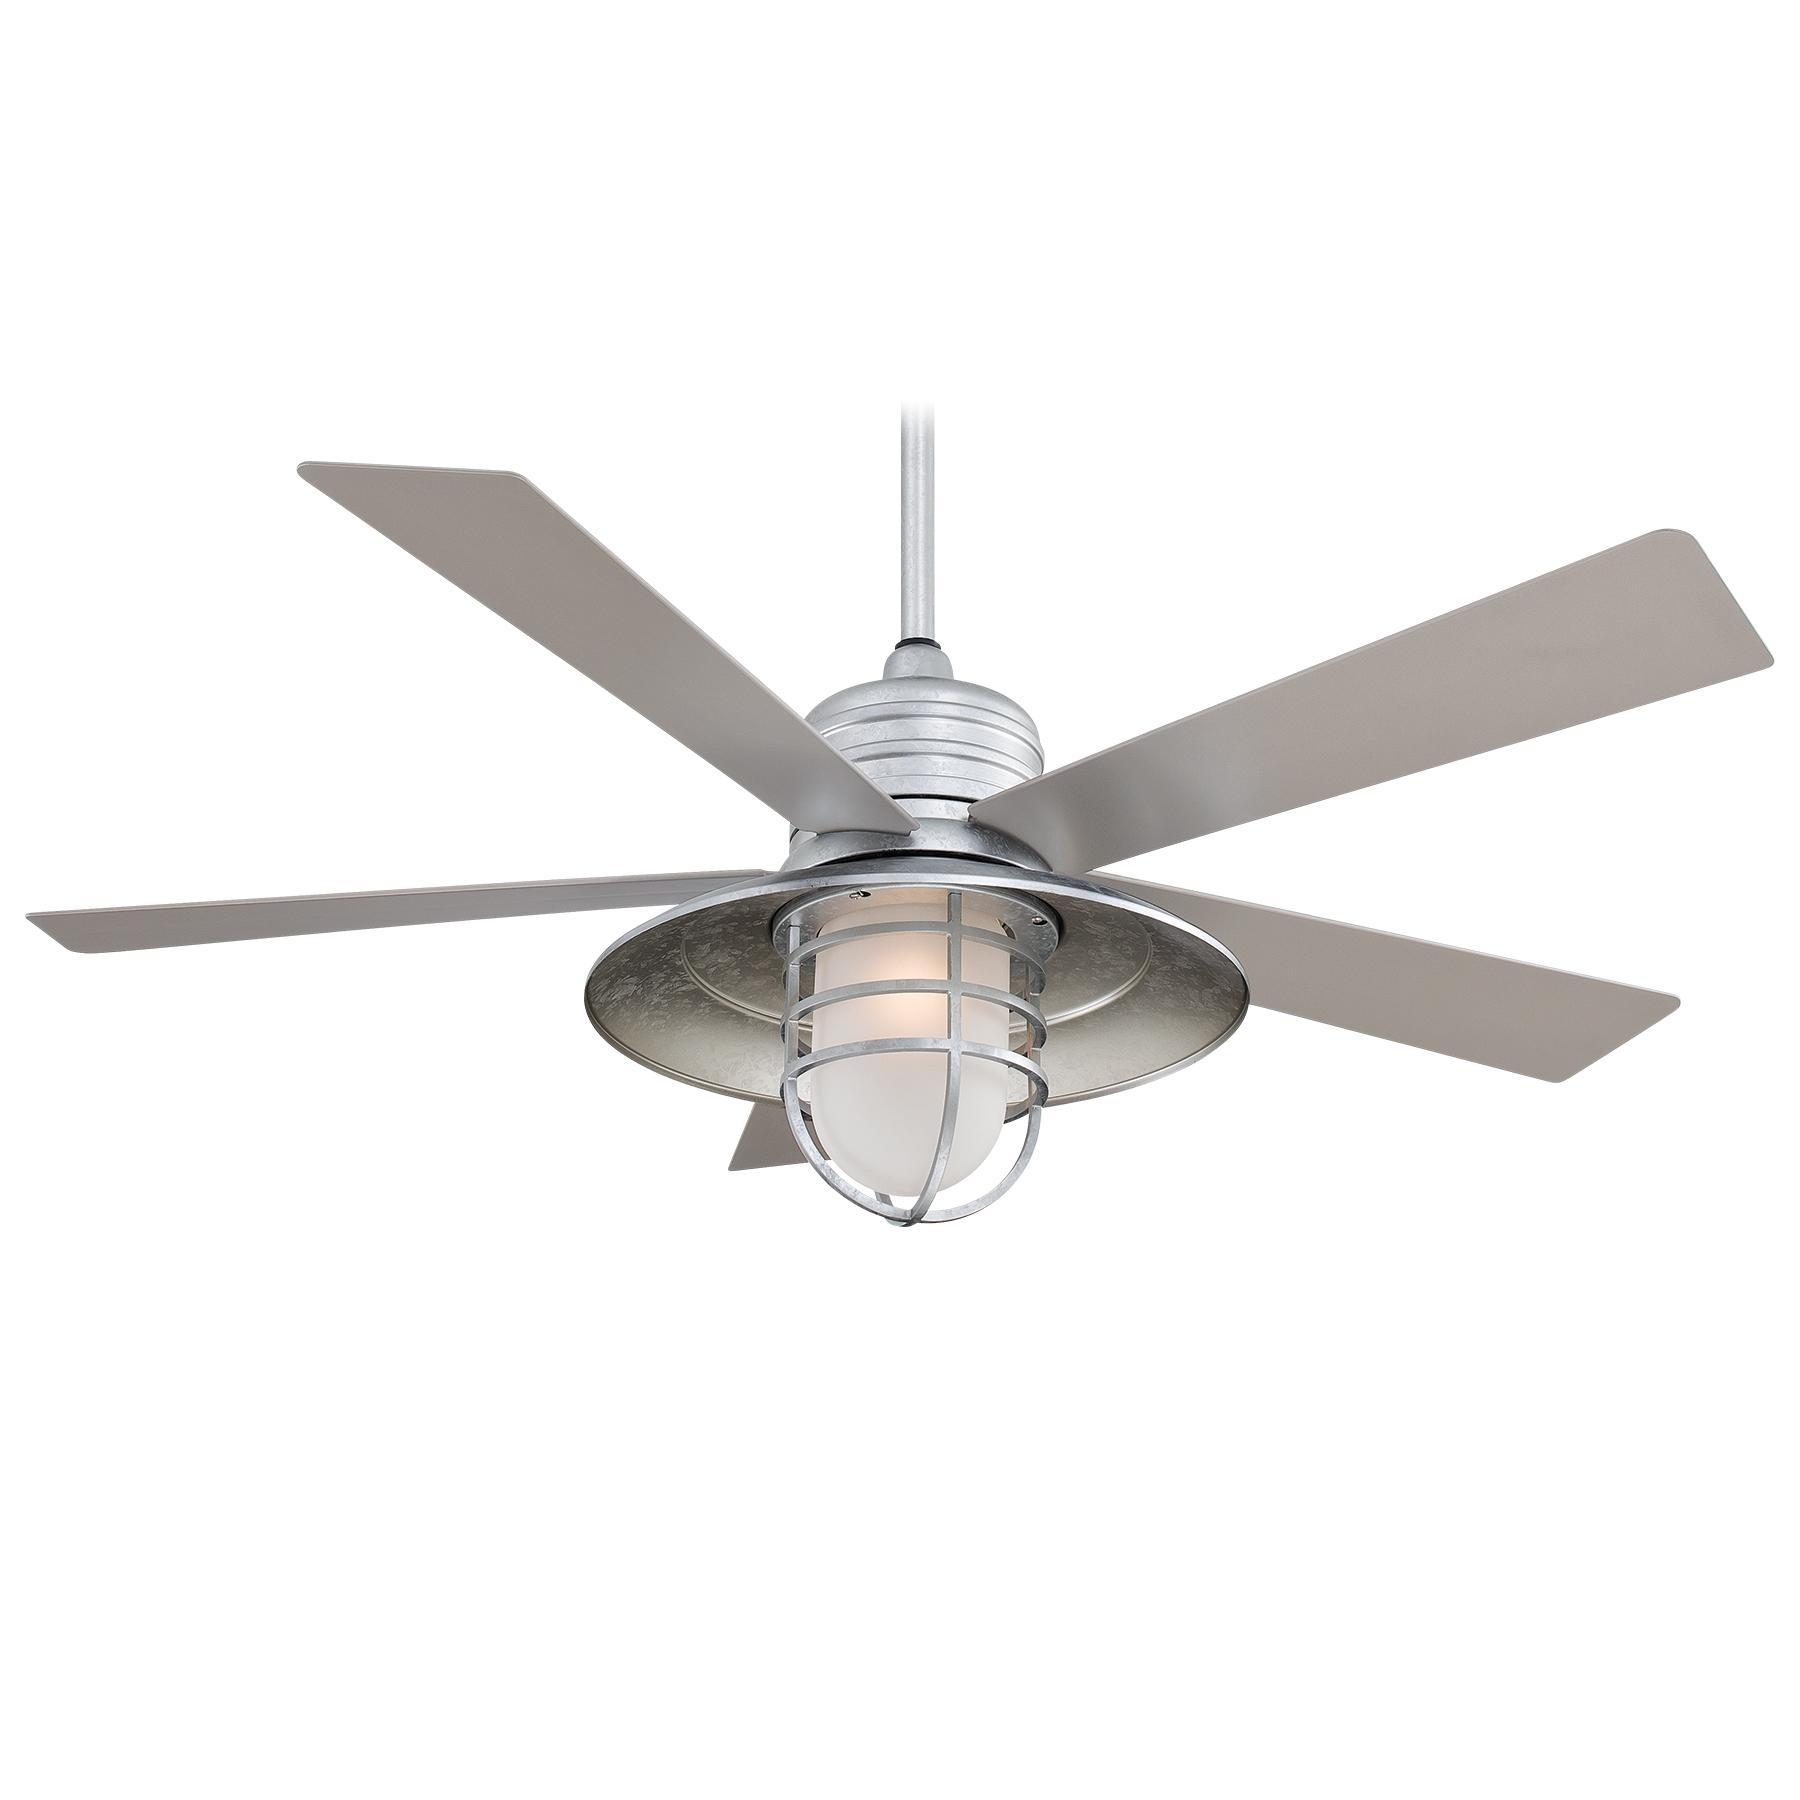 Permalink to Black Ceiling Fan With Bright Light